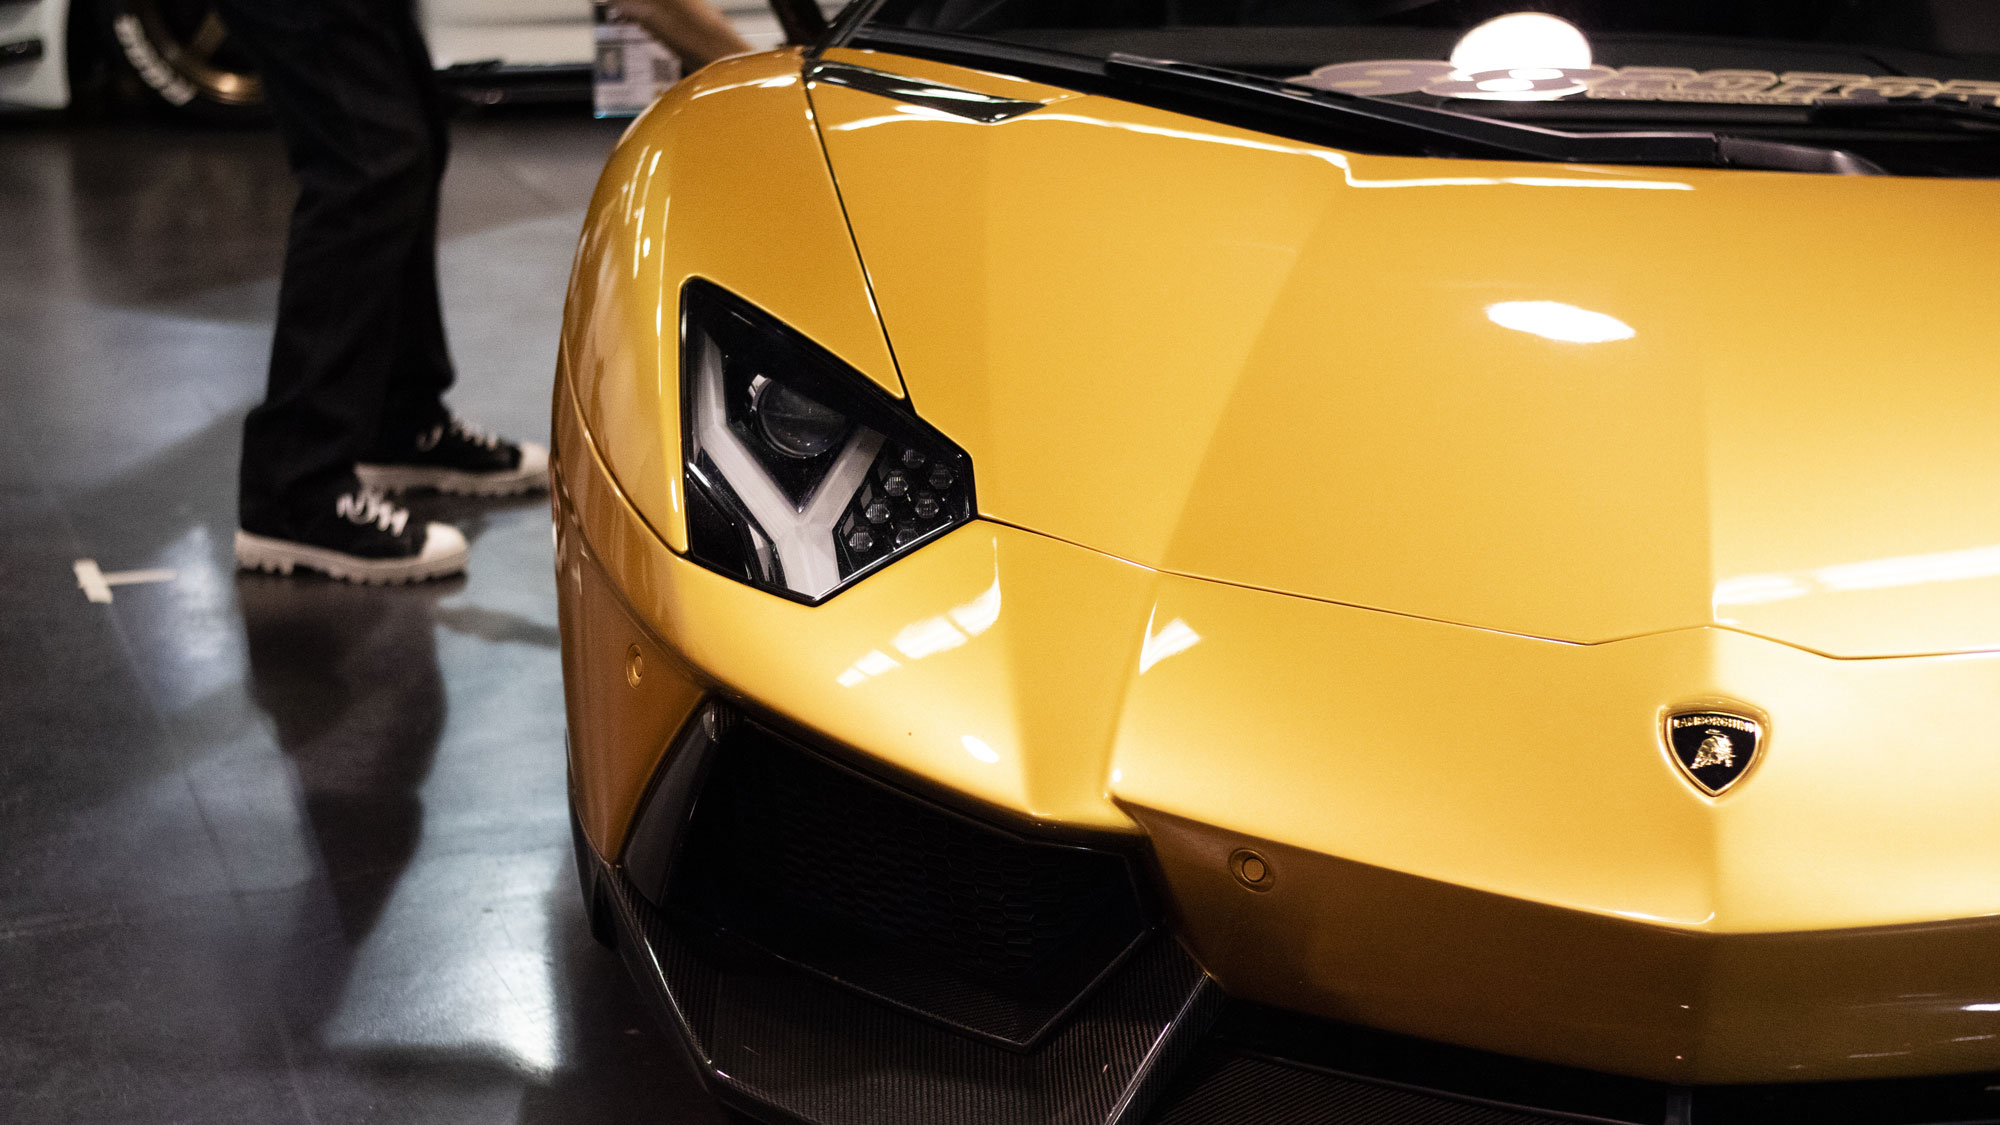 Photo of the front of a yellow/gold/orange colored Lamborghini at SPOCOM Anaheim 2019.